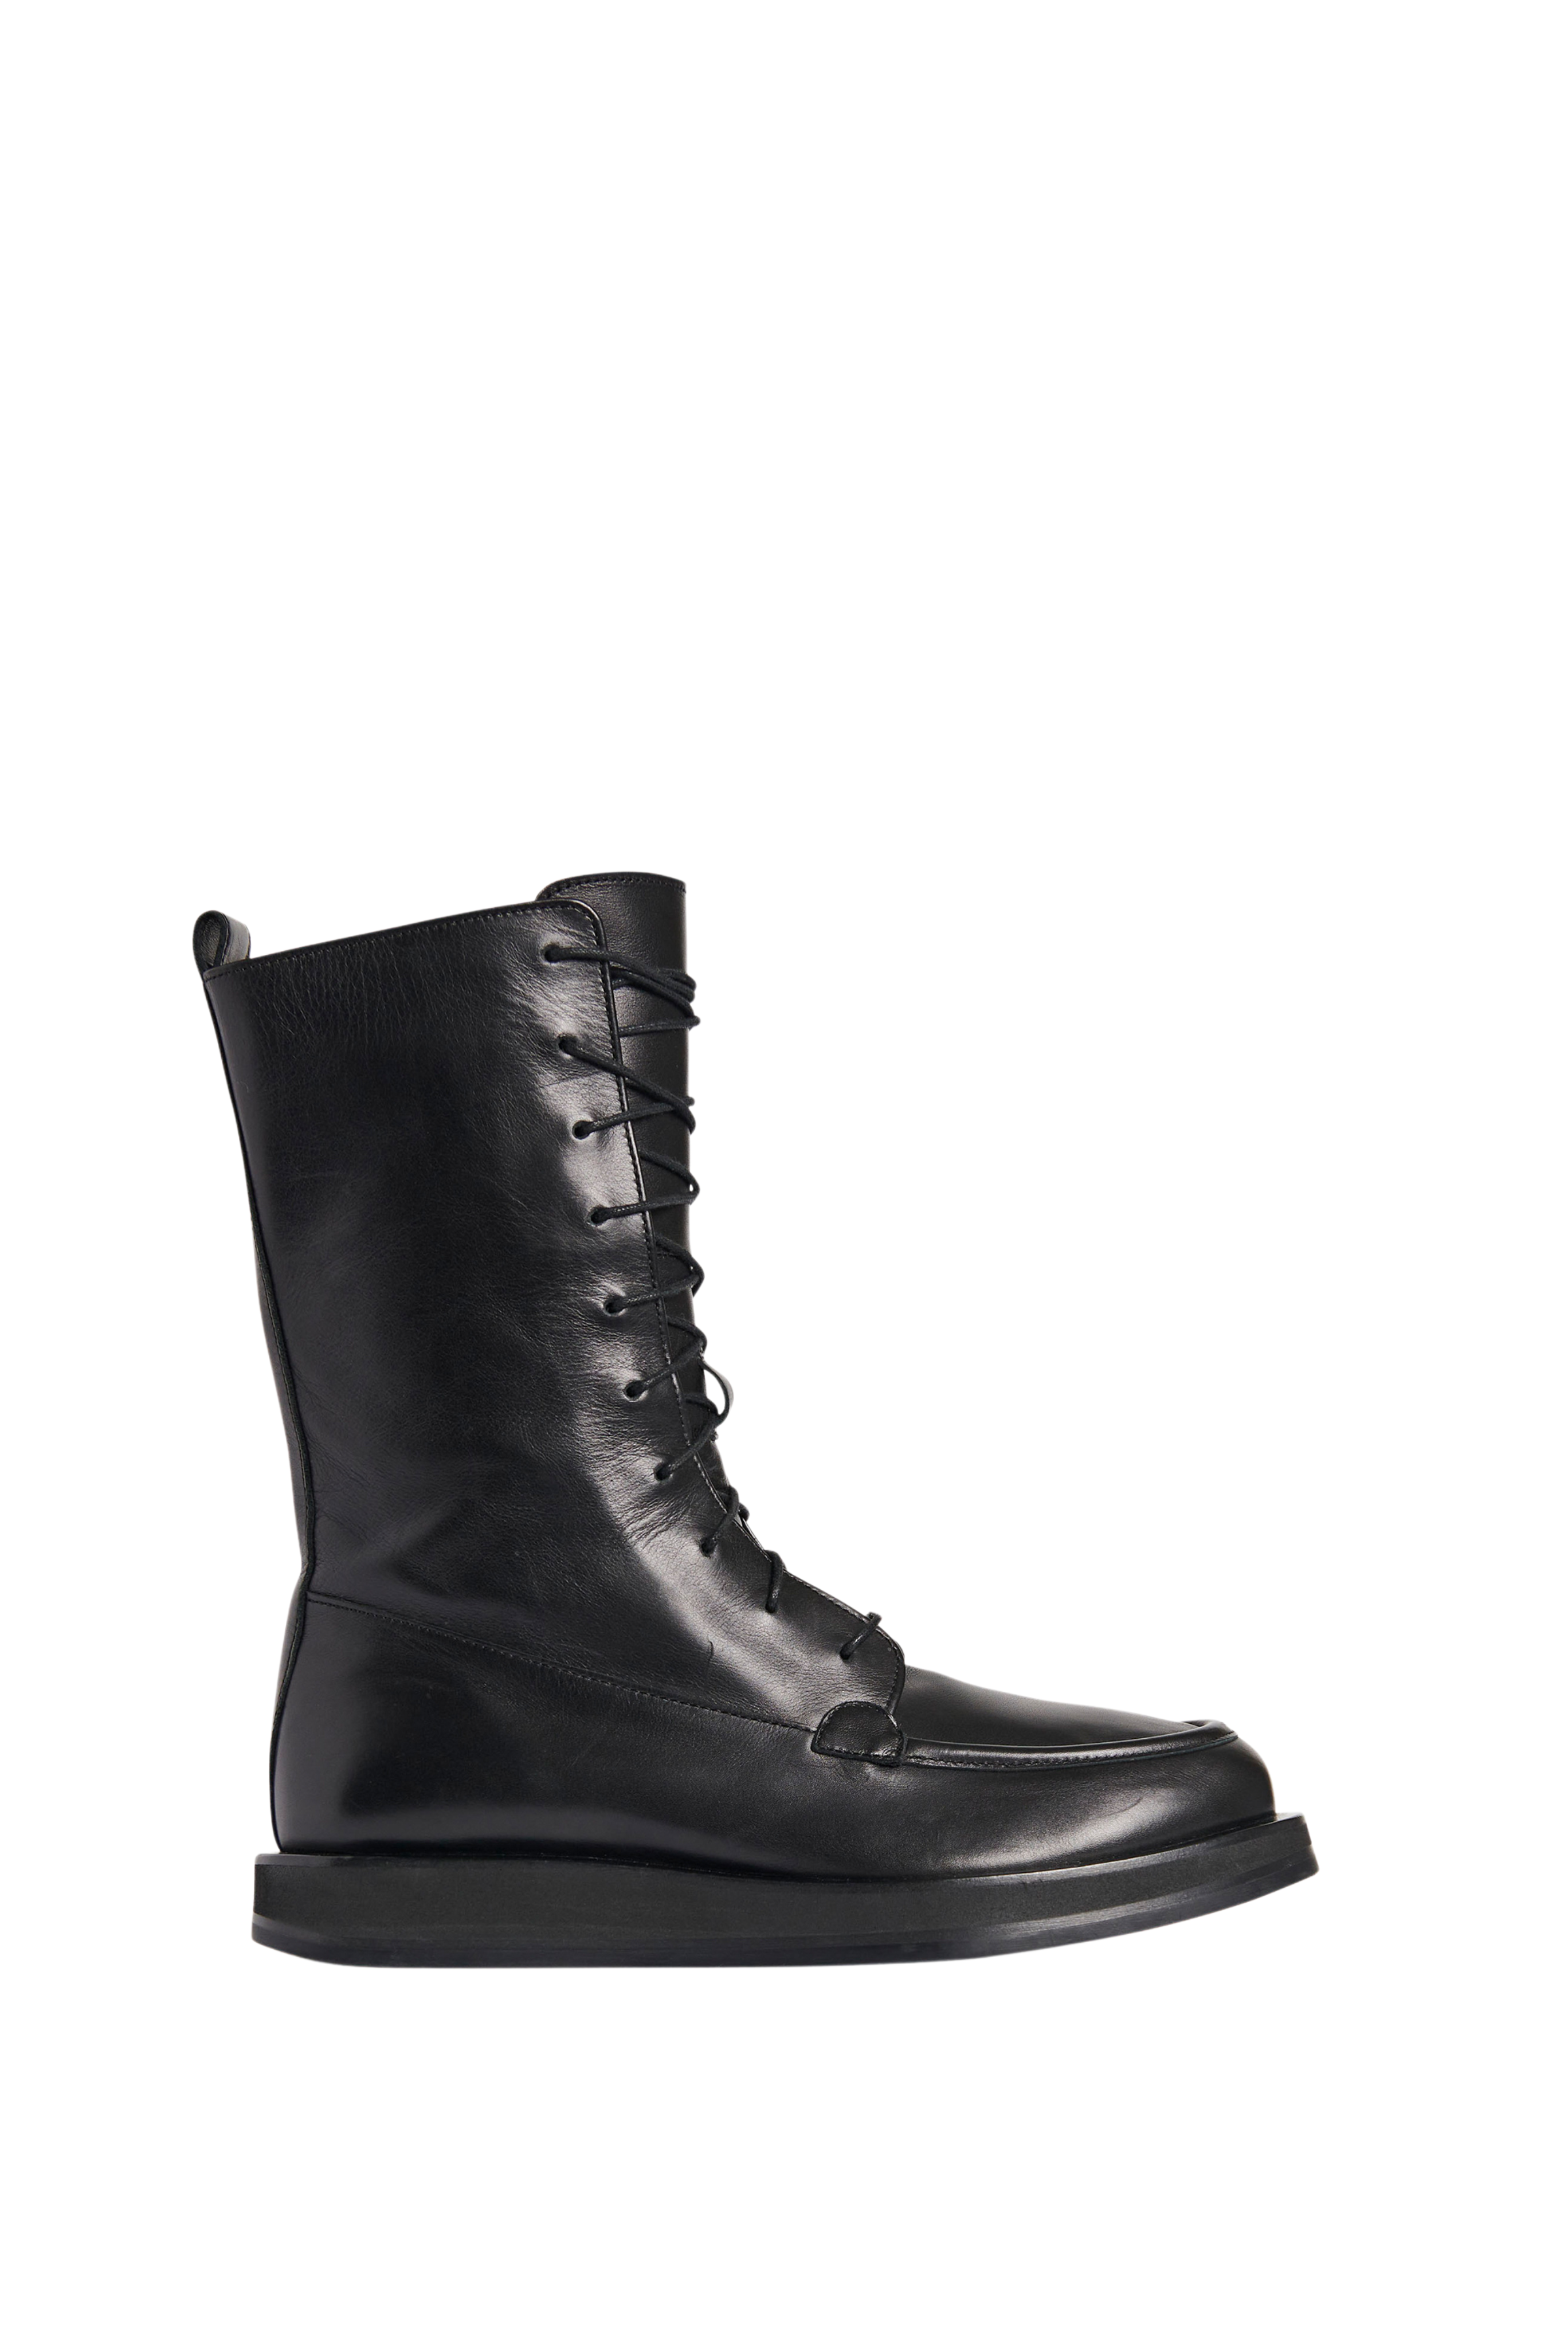 THE ROW Patty Leather Combat Boots